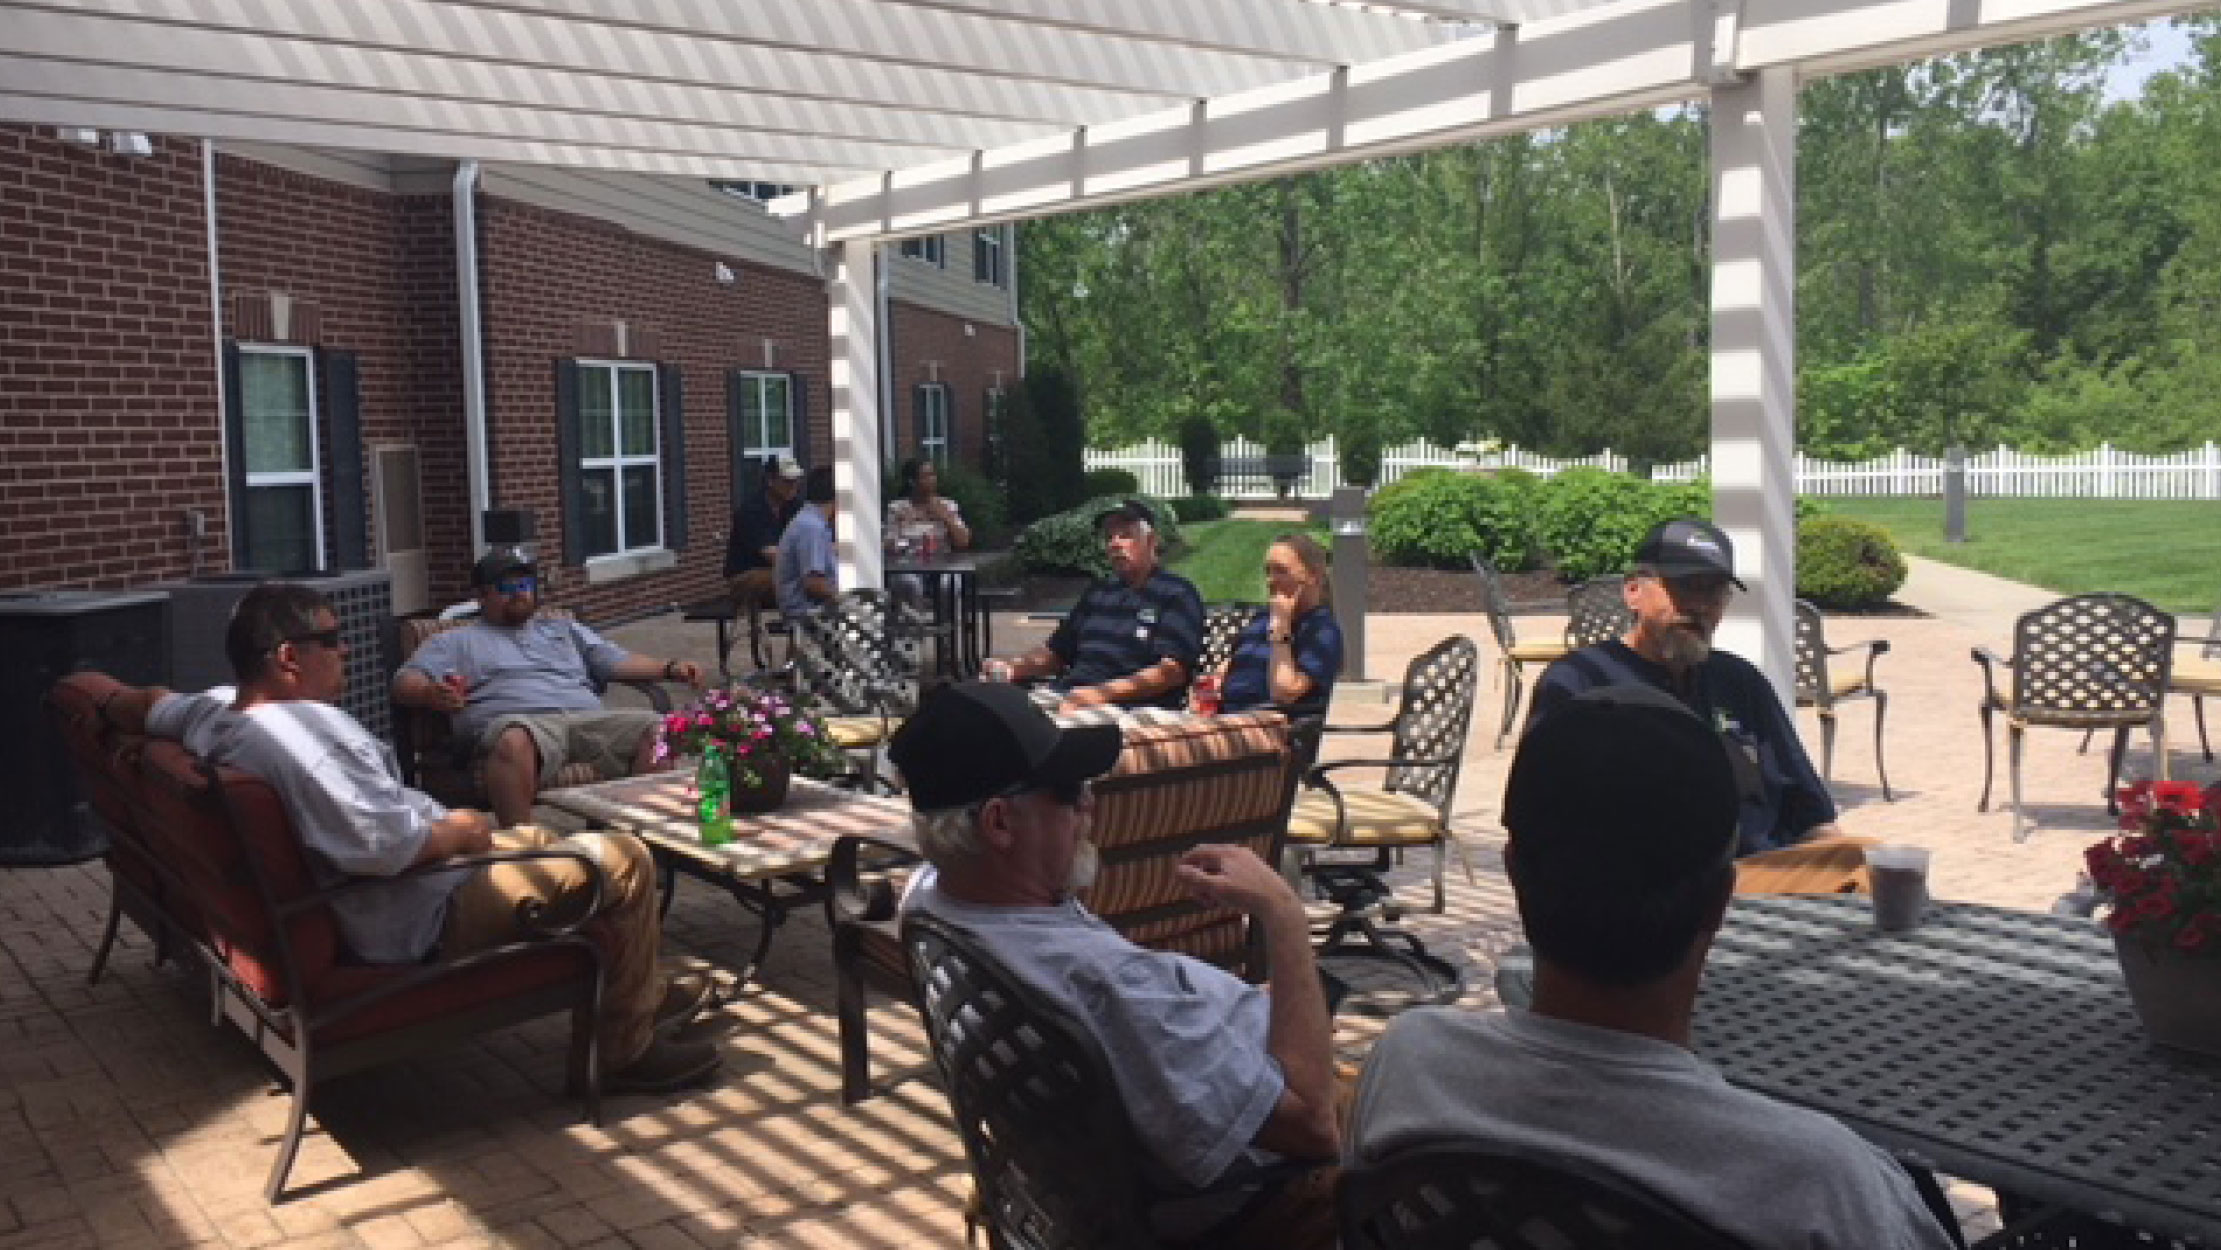 The Fairway Management Western Region Team socializes at their 2019 cookout. On May 15, the Fairway Management Western Region Team held their 2019 cookout at the Residences at Liberty Place